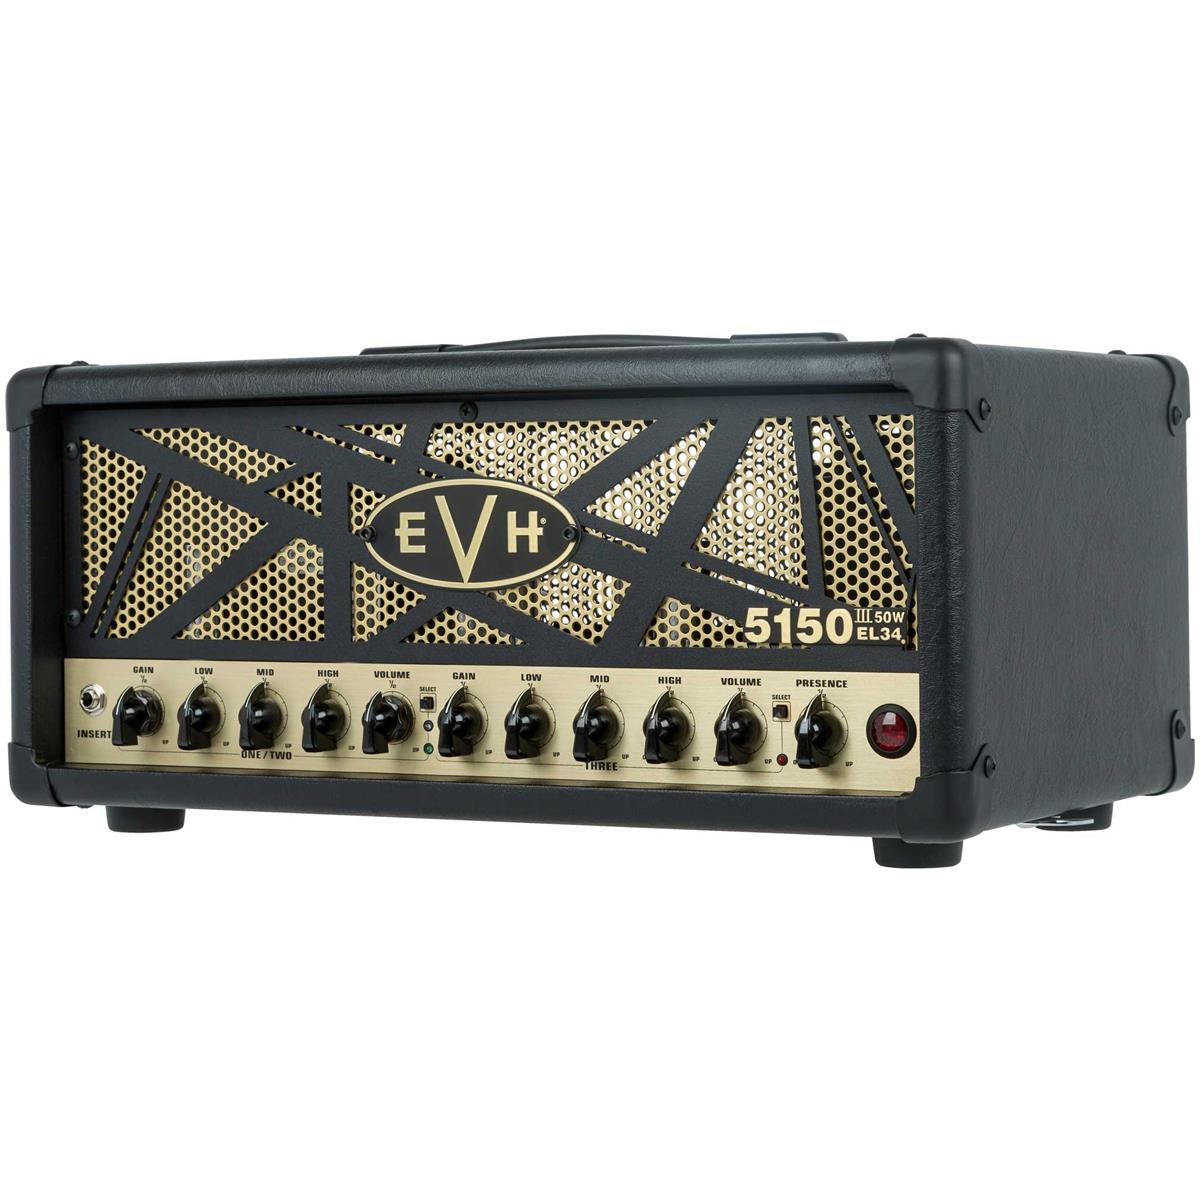 EVH 5150 III 50W EL34 120V Amplifier Head, Black and Gold Motif Independent volume and gain control for all three channels has arrived with the 5150III 50W EL34 head. Experience total control, along with the same lethal looks and ferocious EL34 tone of the 100-Watt head. The EL34 power tubes deliver signature harmonic overtones, with more dynamic compression and saturation that evoke a more modern "British" sound, all with the sustain and versatility expected from EVH 5150III amps. Channel one boasts a more sparkling and compressed clean tone, while channels two and three possess a slightly darker and compressed tone with even more saturation than before. Channels one and two each have dual concentric gain/volume controls, with shared EQ (low, mid, high), while channel 3 has an independent EQ. Other features include a rear-panel resonance control that tailors low-frequency response for all channels and a global presence control. Wrapped in an elegant gold and black EVH motif, the EL34 50-watt head also is equipped with an effects loop, headphone jack, pre-amp out and midi-in.